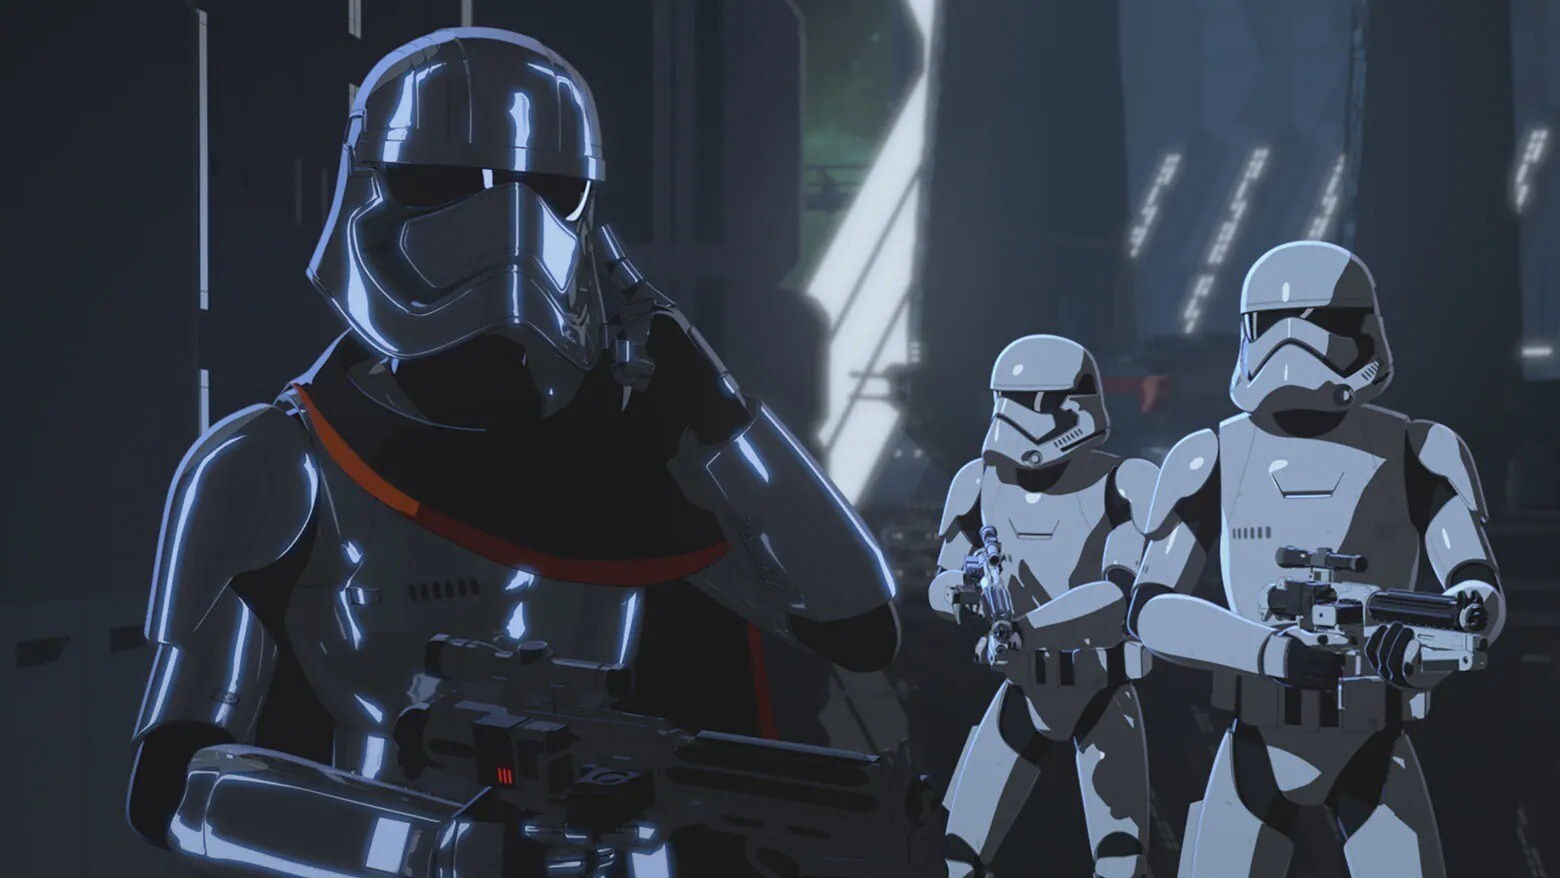 Captain Phasma with two Stormtroopers in the background